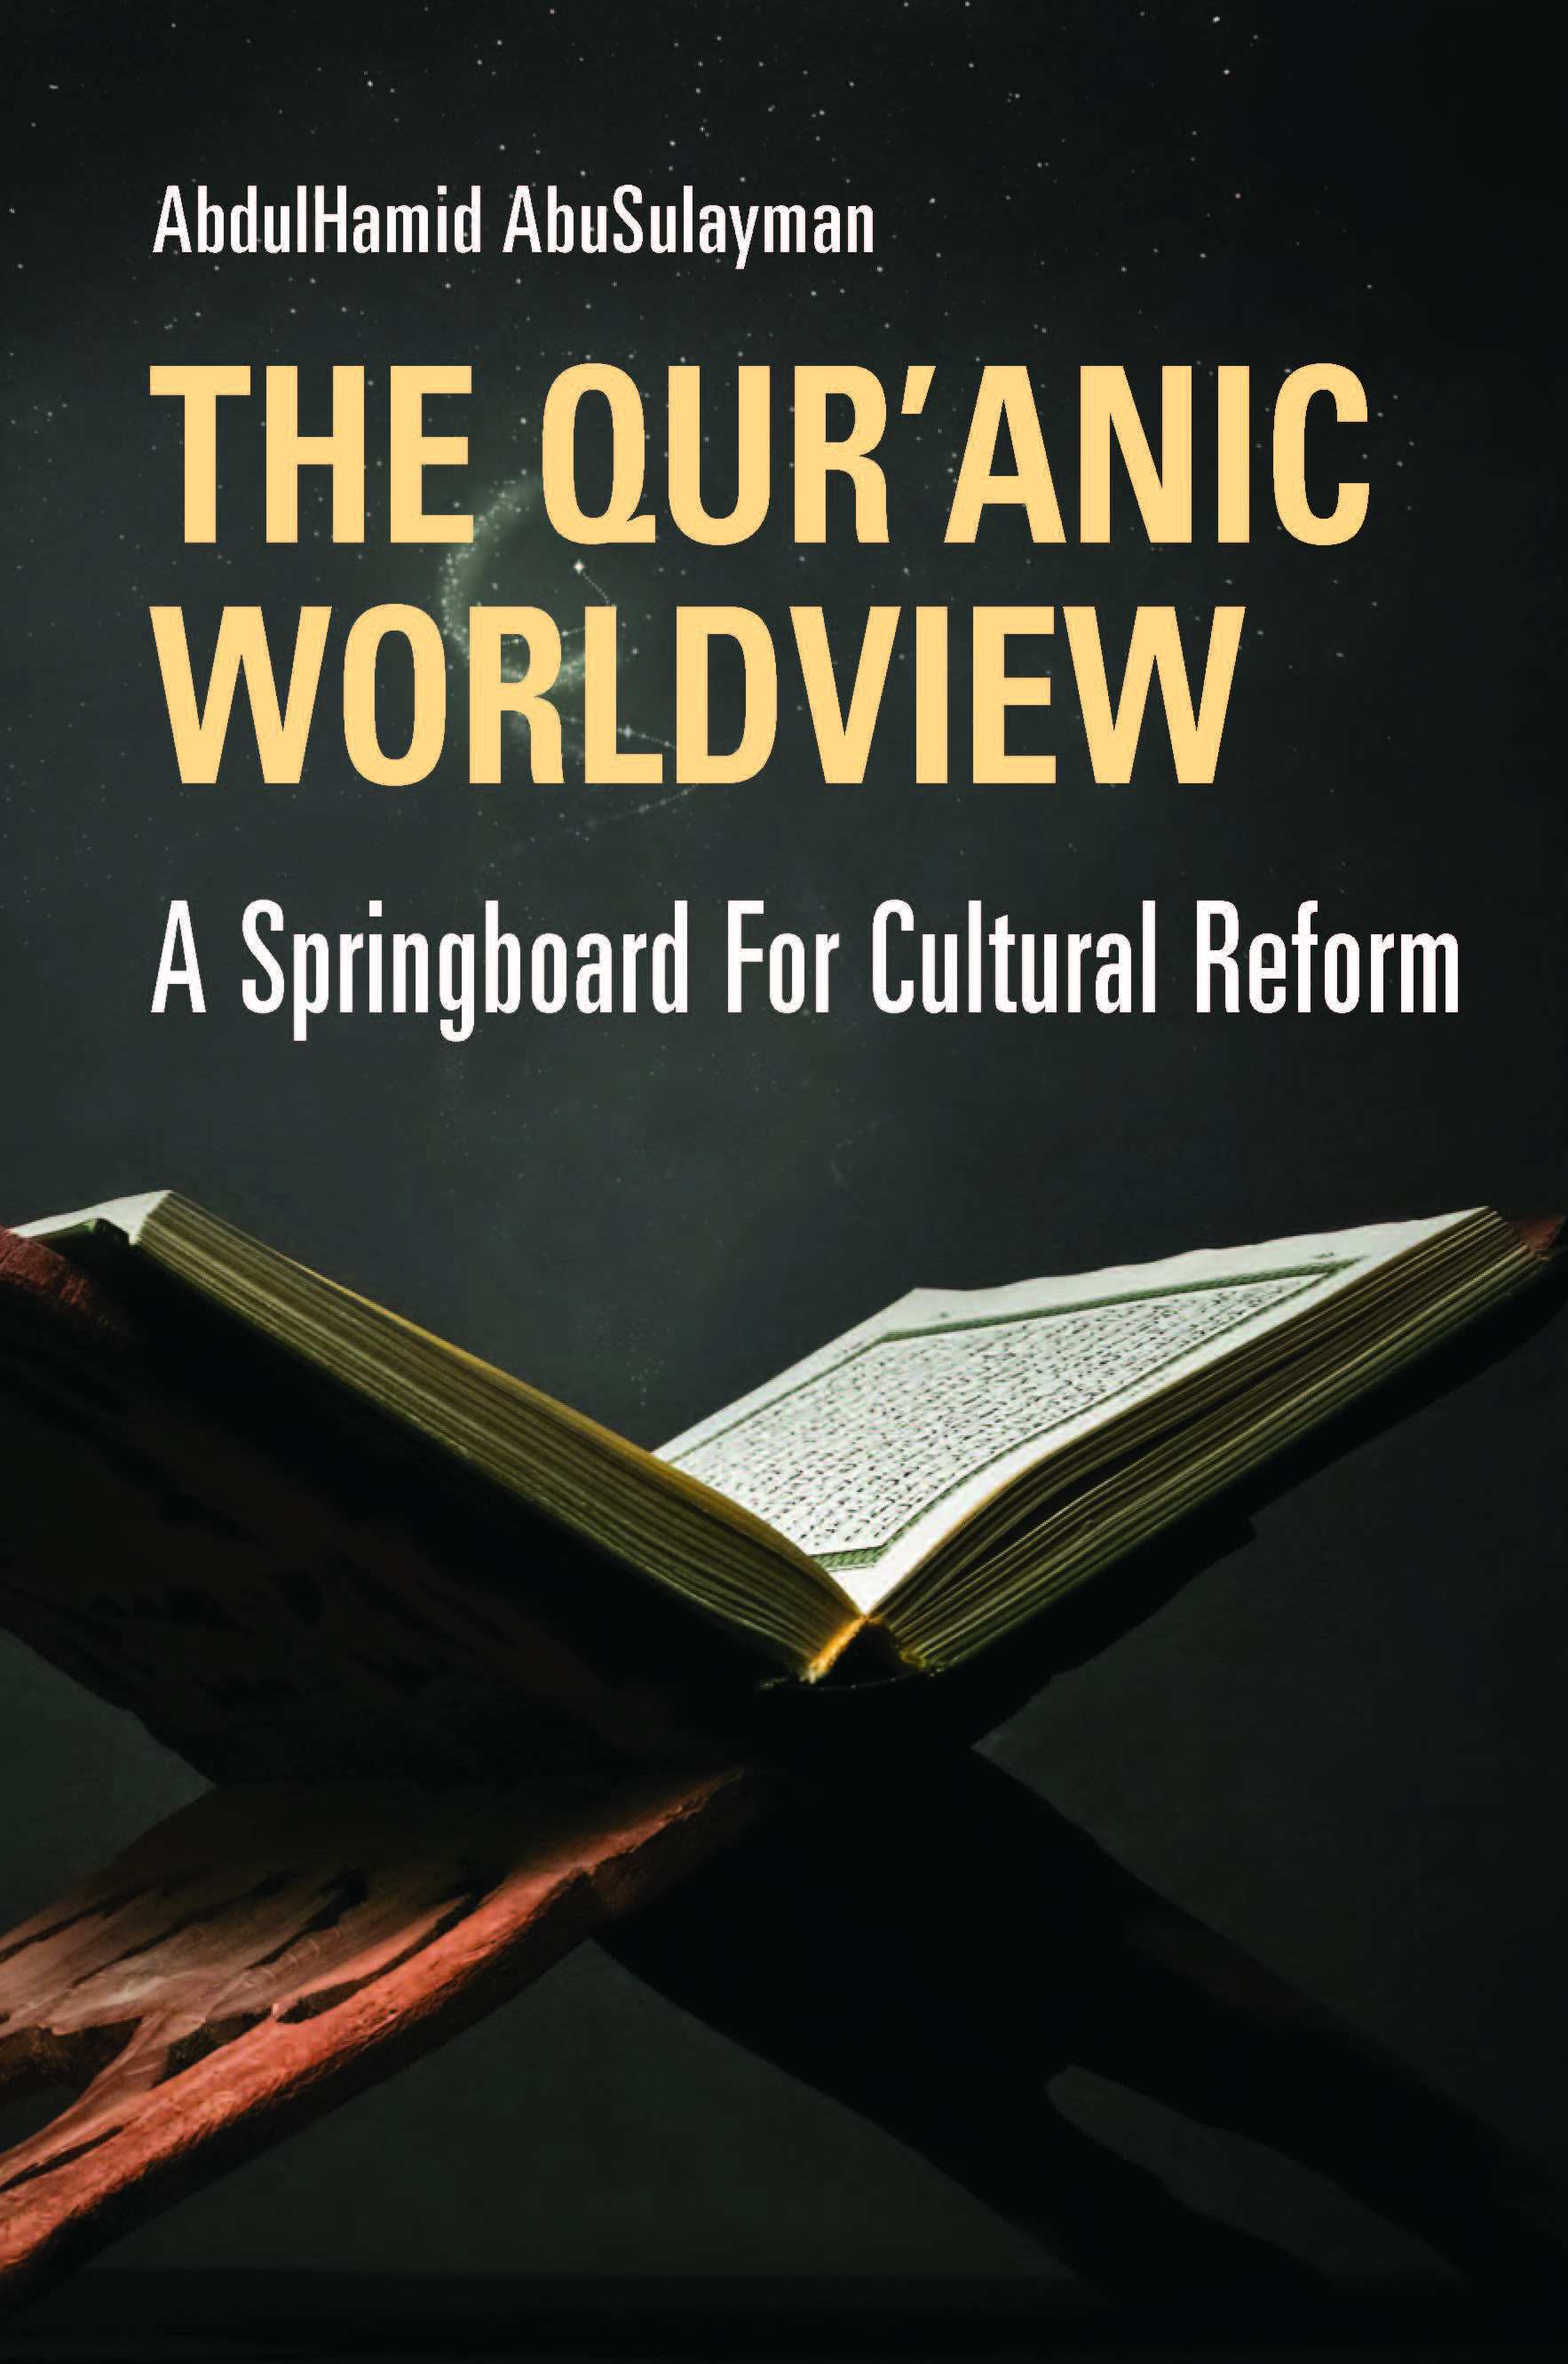 The Qur’anic Worldview: A Springboard for Cultural Reform